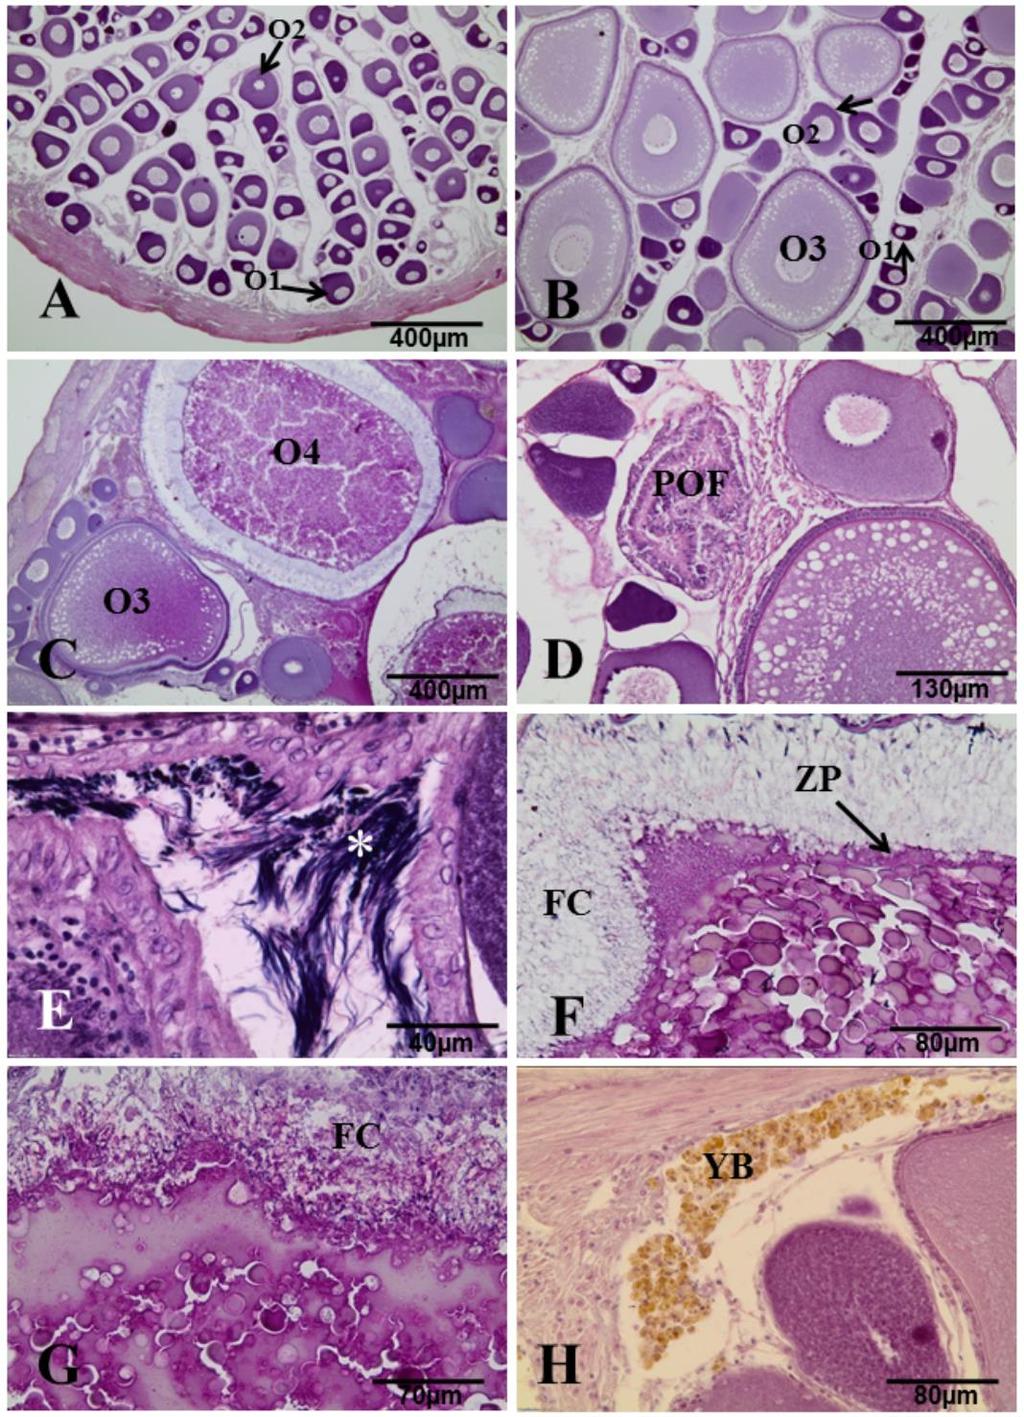 Fig. 4 - Histological sections of T. galeatus ovaries in different maturation stages stained with HE.